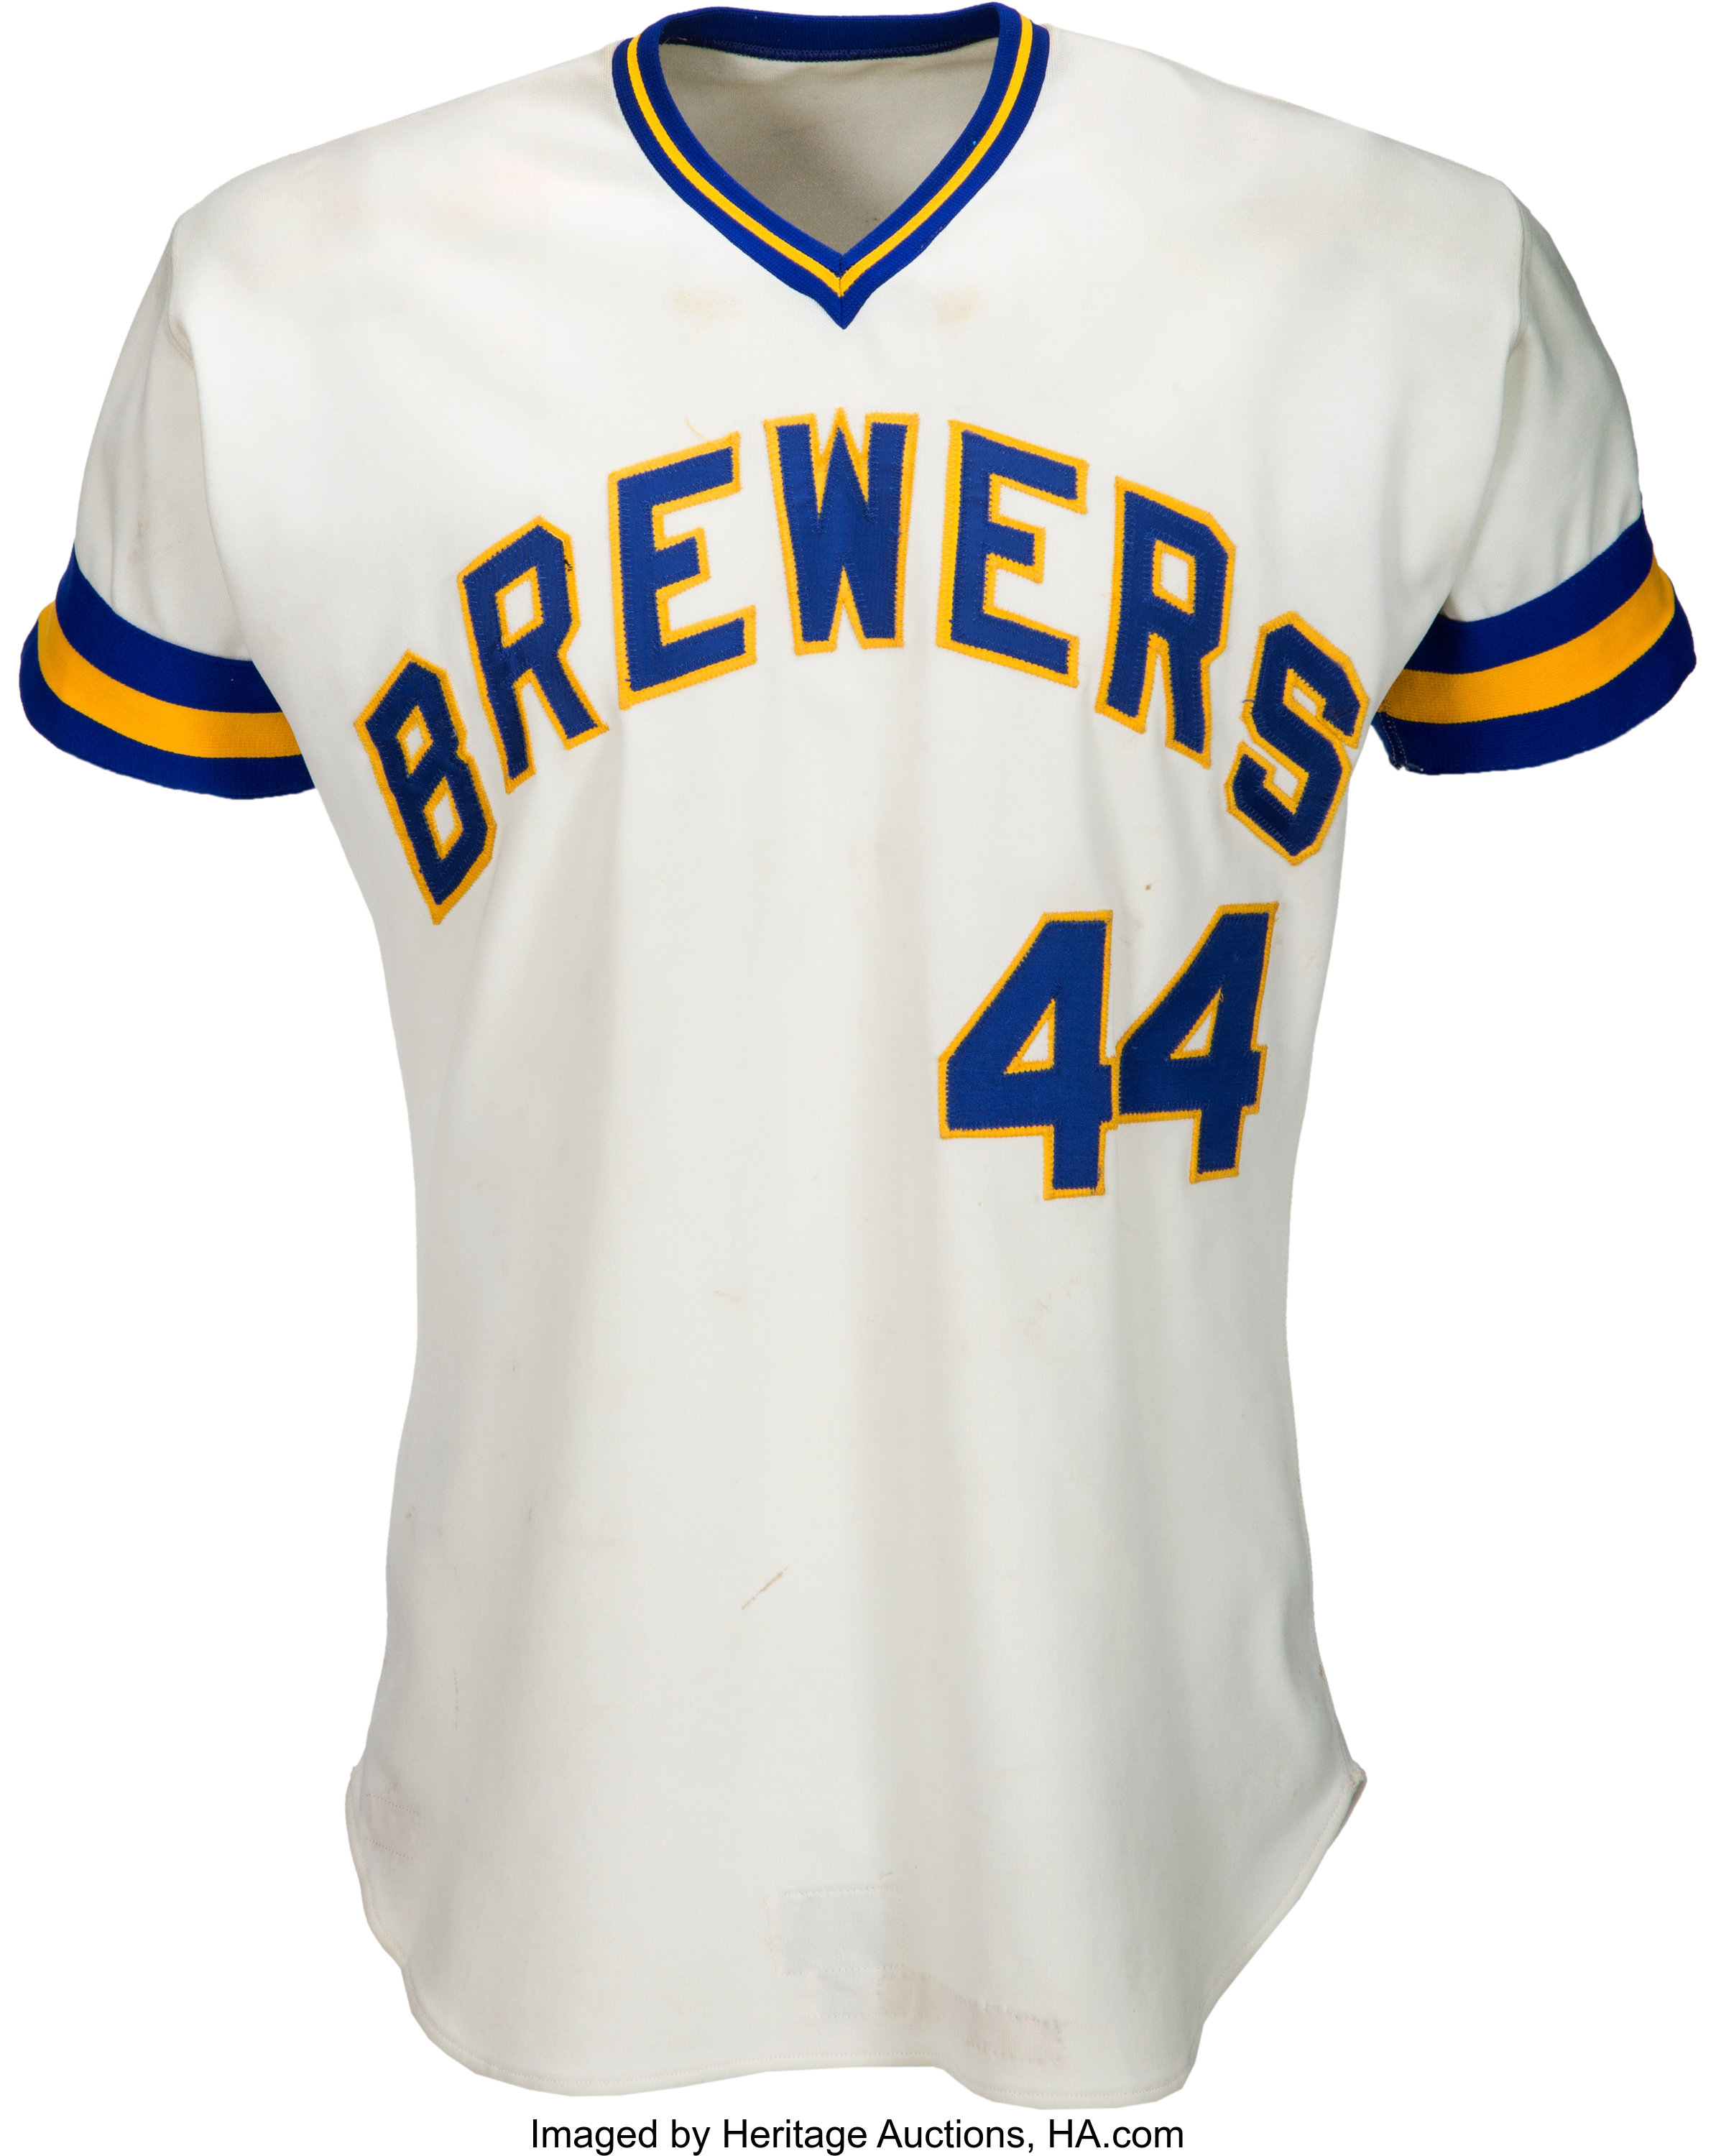 1976 AUTHENTIC VINTAGE HANK AARON BREWERS JERSEY MITCHELL NESS RARE SIZE  4XL 60